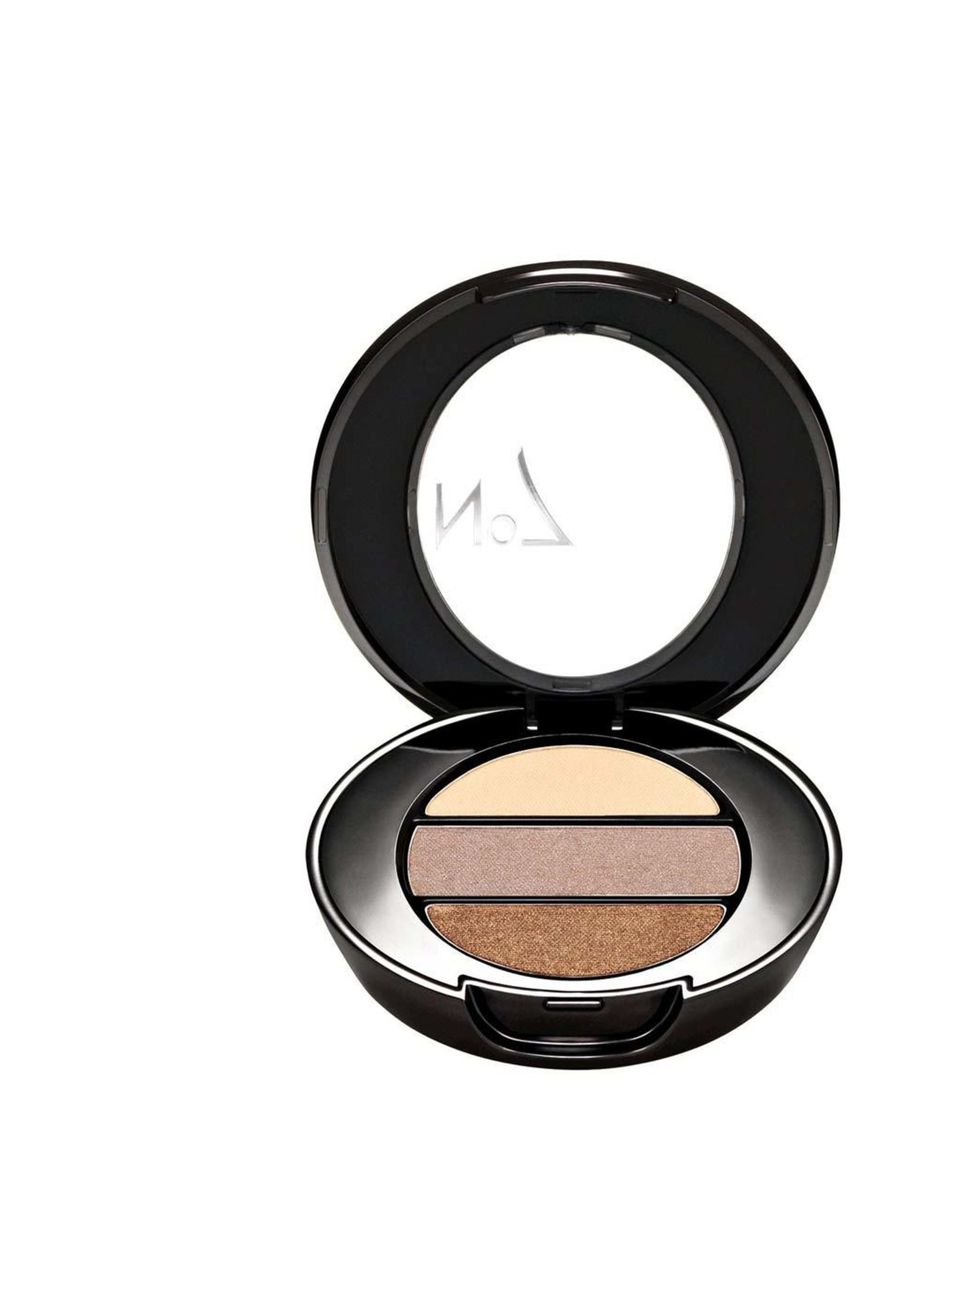 <p><a href="http://www.boots.com/en/No7-Stay-Perfect-Eyeshadow-Trio_1273275/">No.7 Stay Perfect Eyeshadow Trio in Good Earth, £9.50</a></p><p>Recreate Kates copper smoky eyes with this all-in-one palette. Use the lightest shade to highlight in corner of 